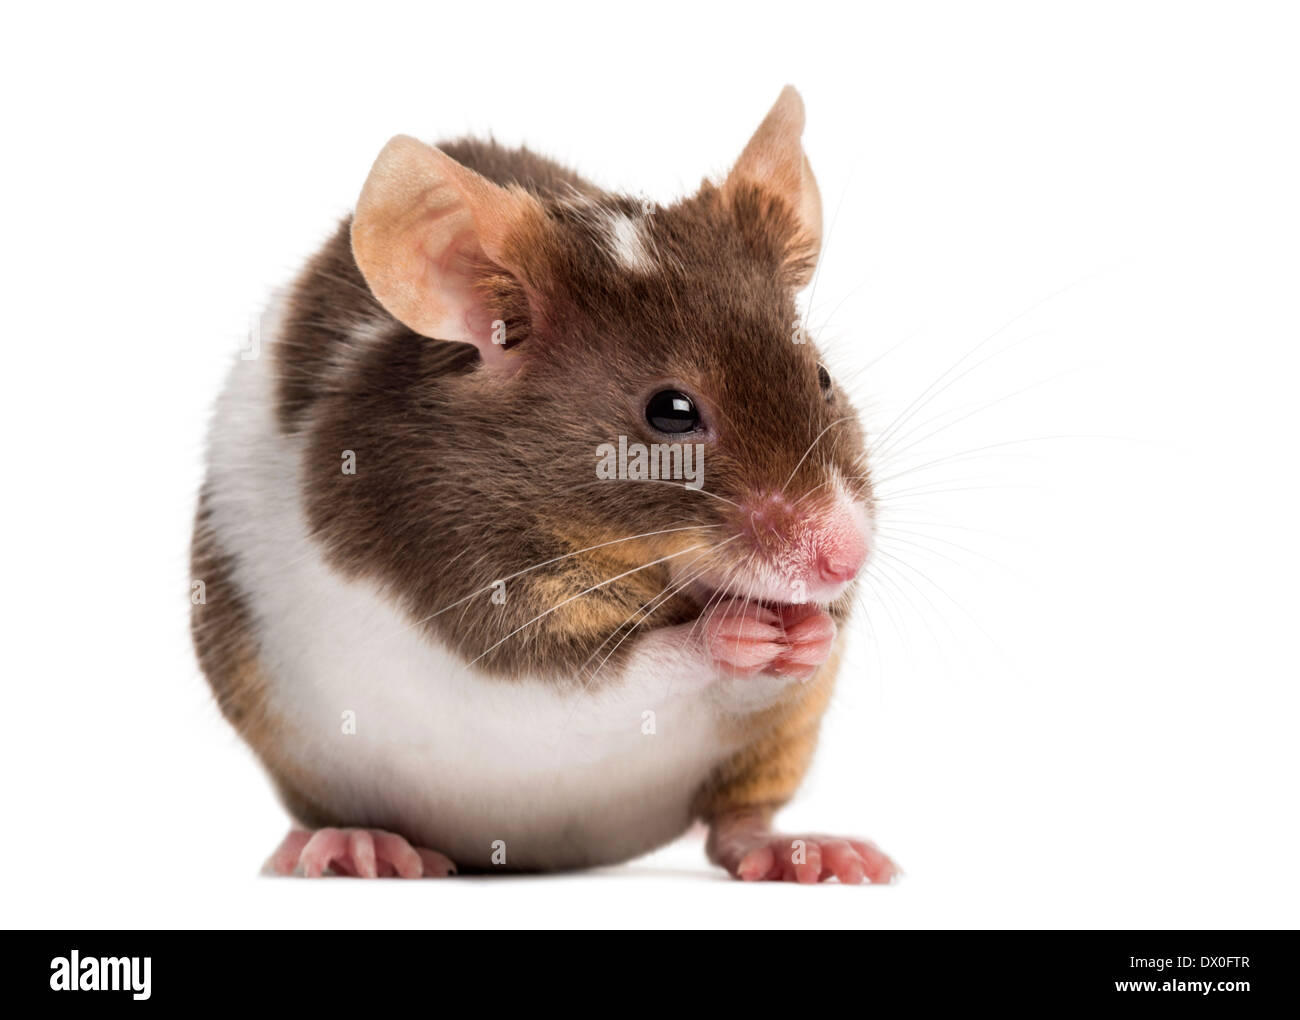 Common house mouse, Mus musculus, in front of white background Stock Photo